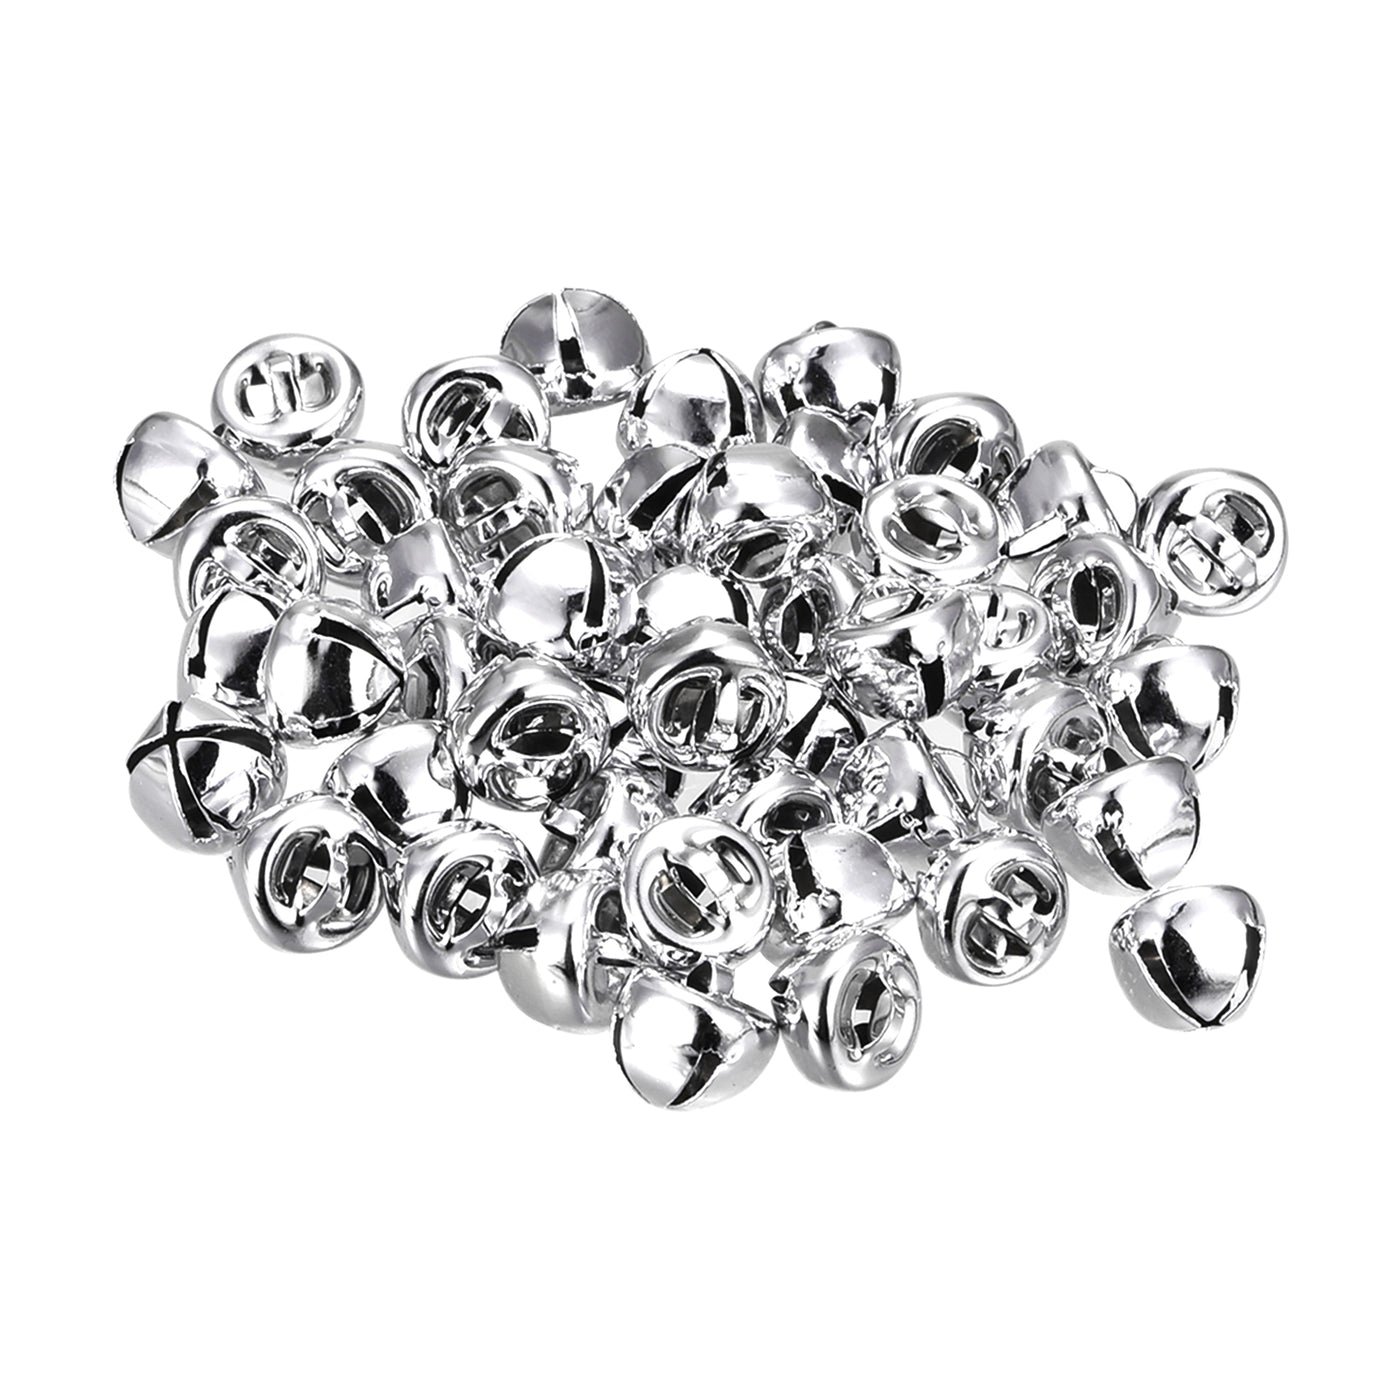 uxcell Uxcell Jingle Bells, 10mm 120pcs Small Bells for Crafts DIY Christmas, Silver Tone